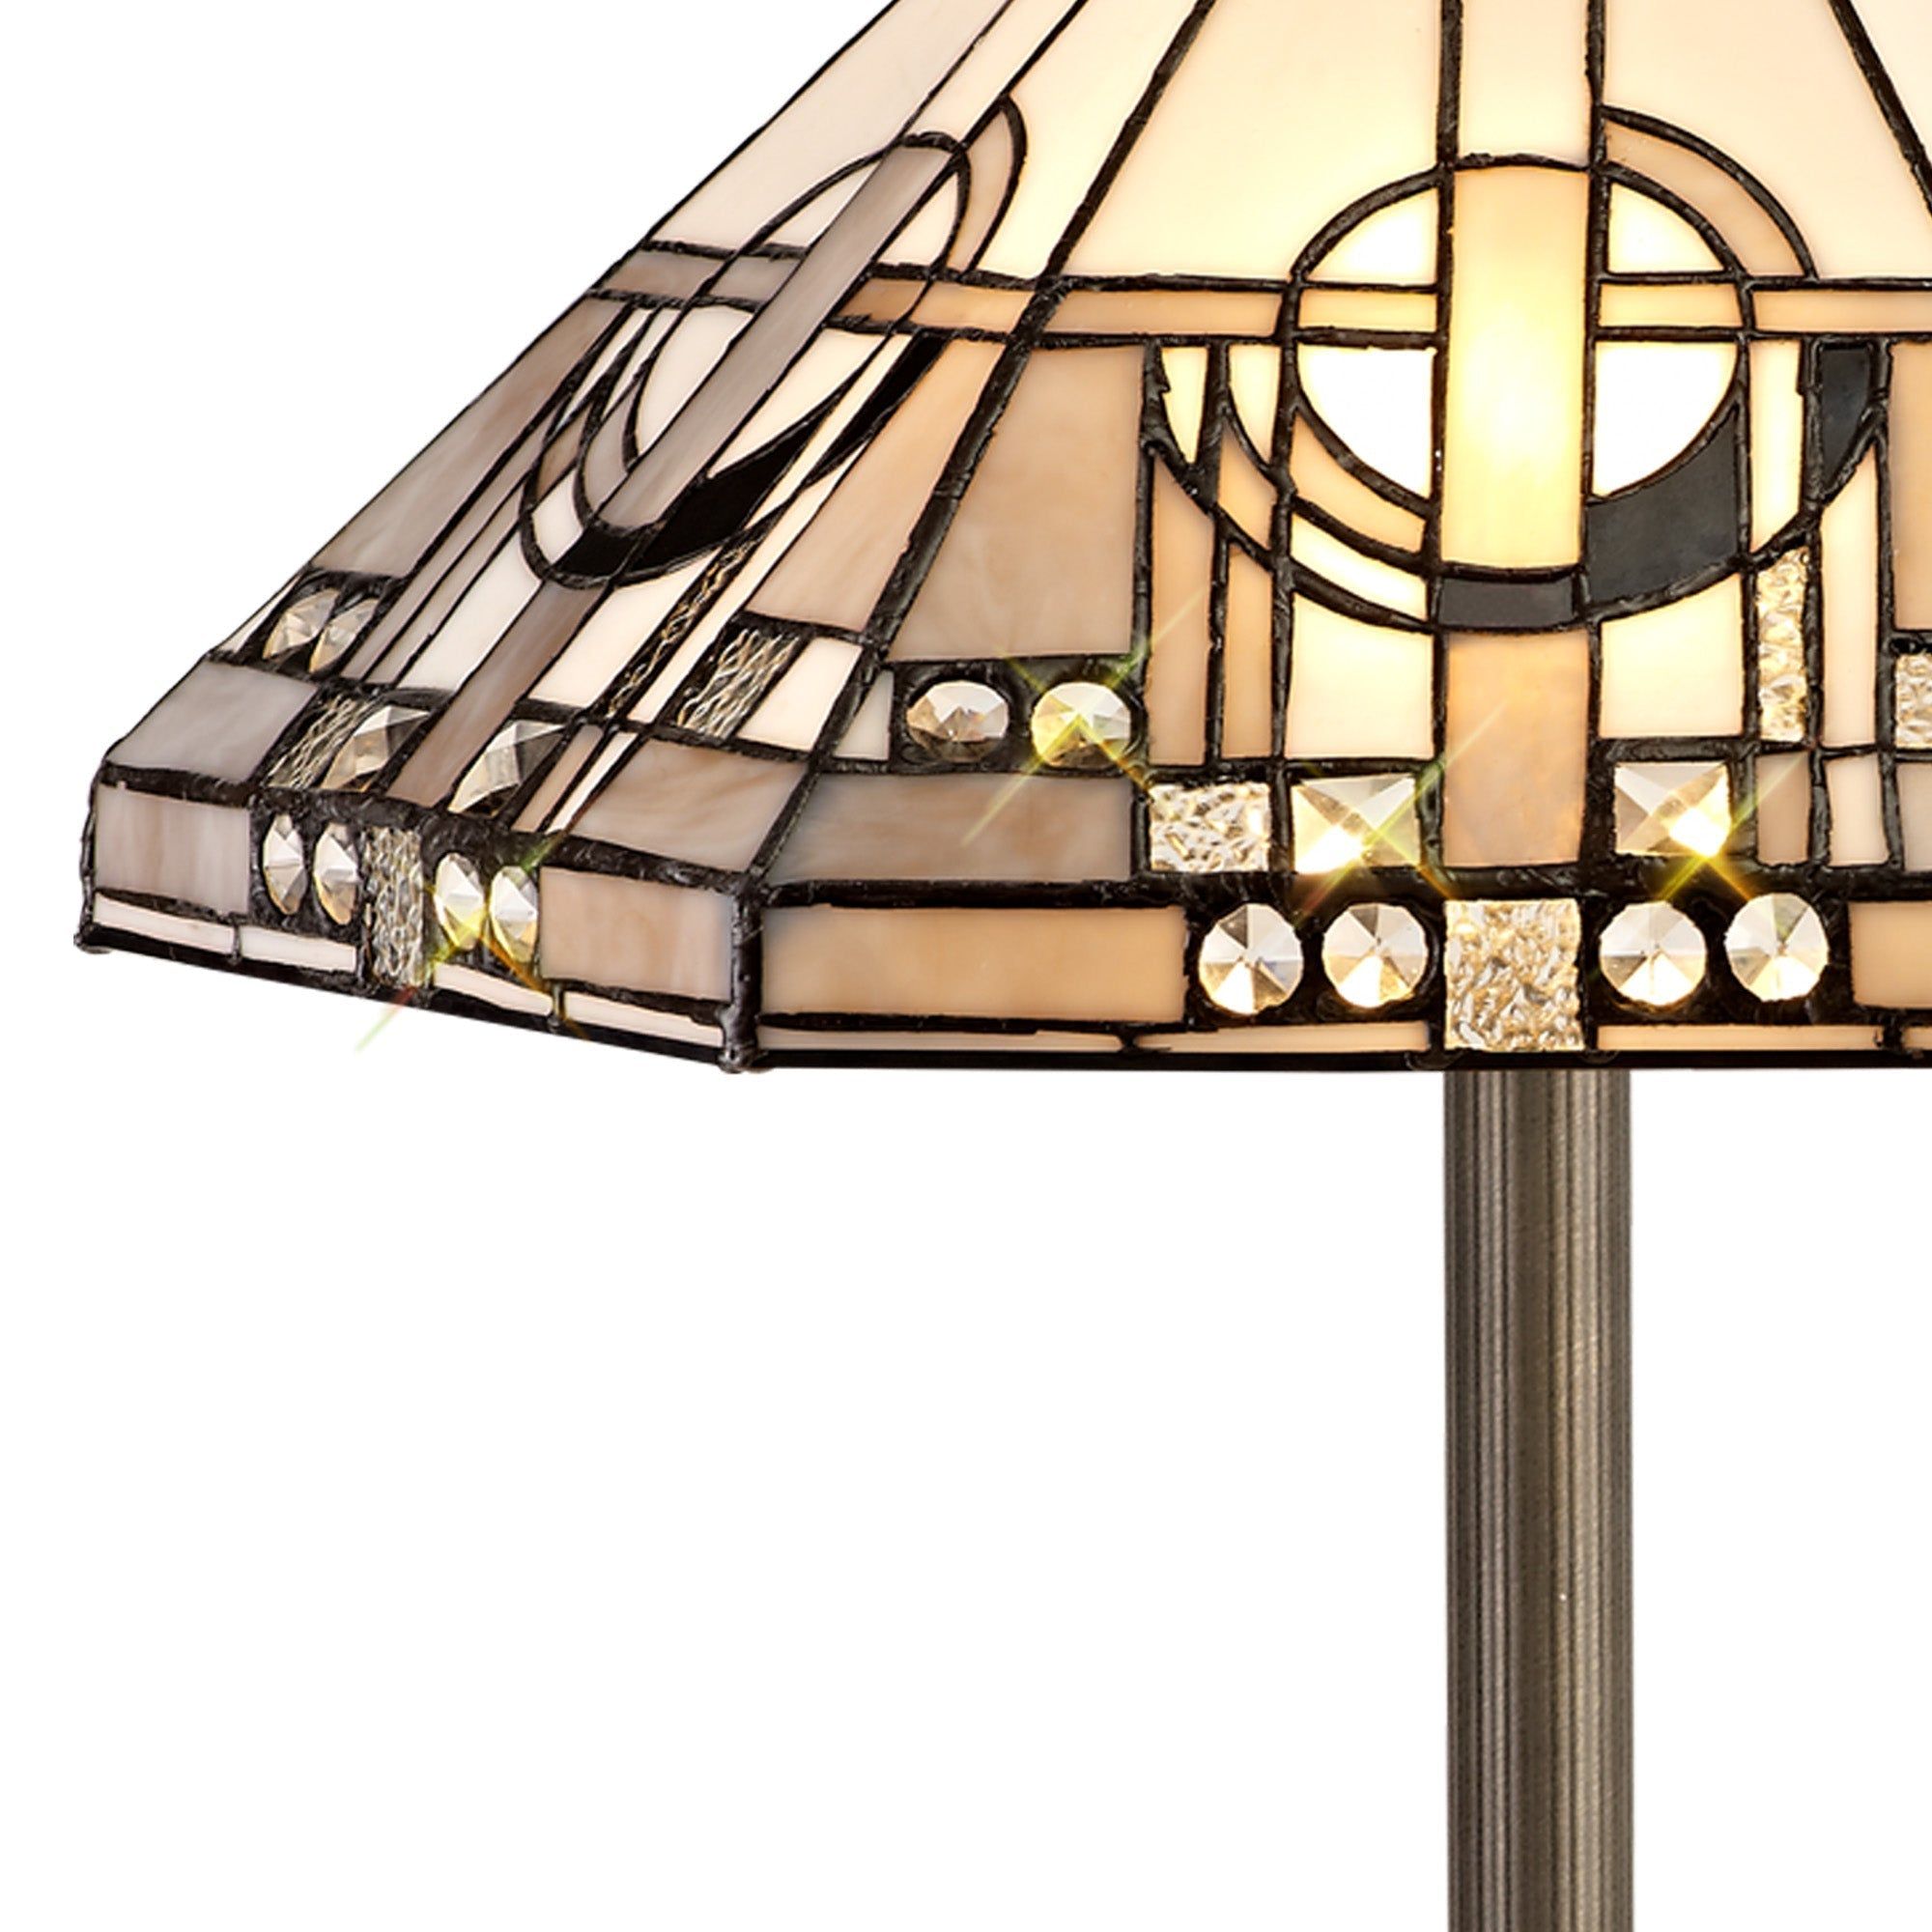 Guild 2 Light Leaf/Octagonal/Stepped  Design Floor Lamp E27 With 40cm Tiffany Shade, White/Grey/Black/Clear Crystal/Aged Antique Brass